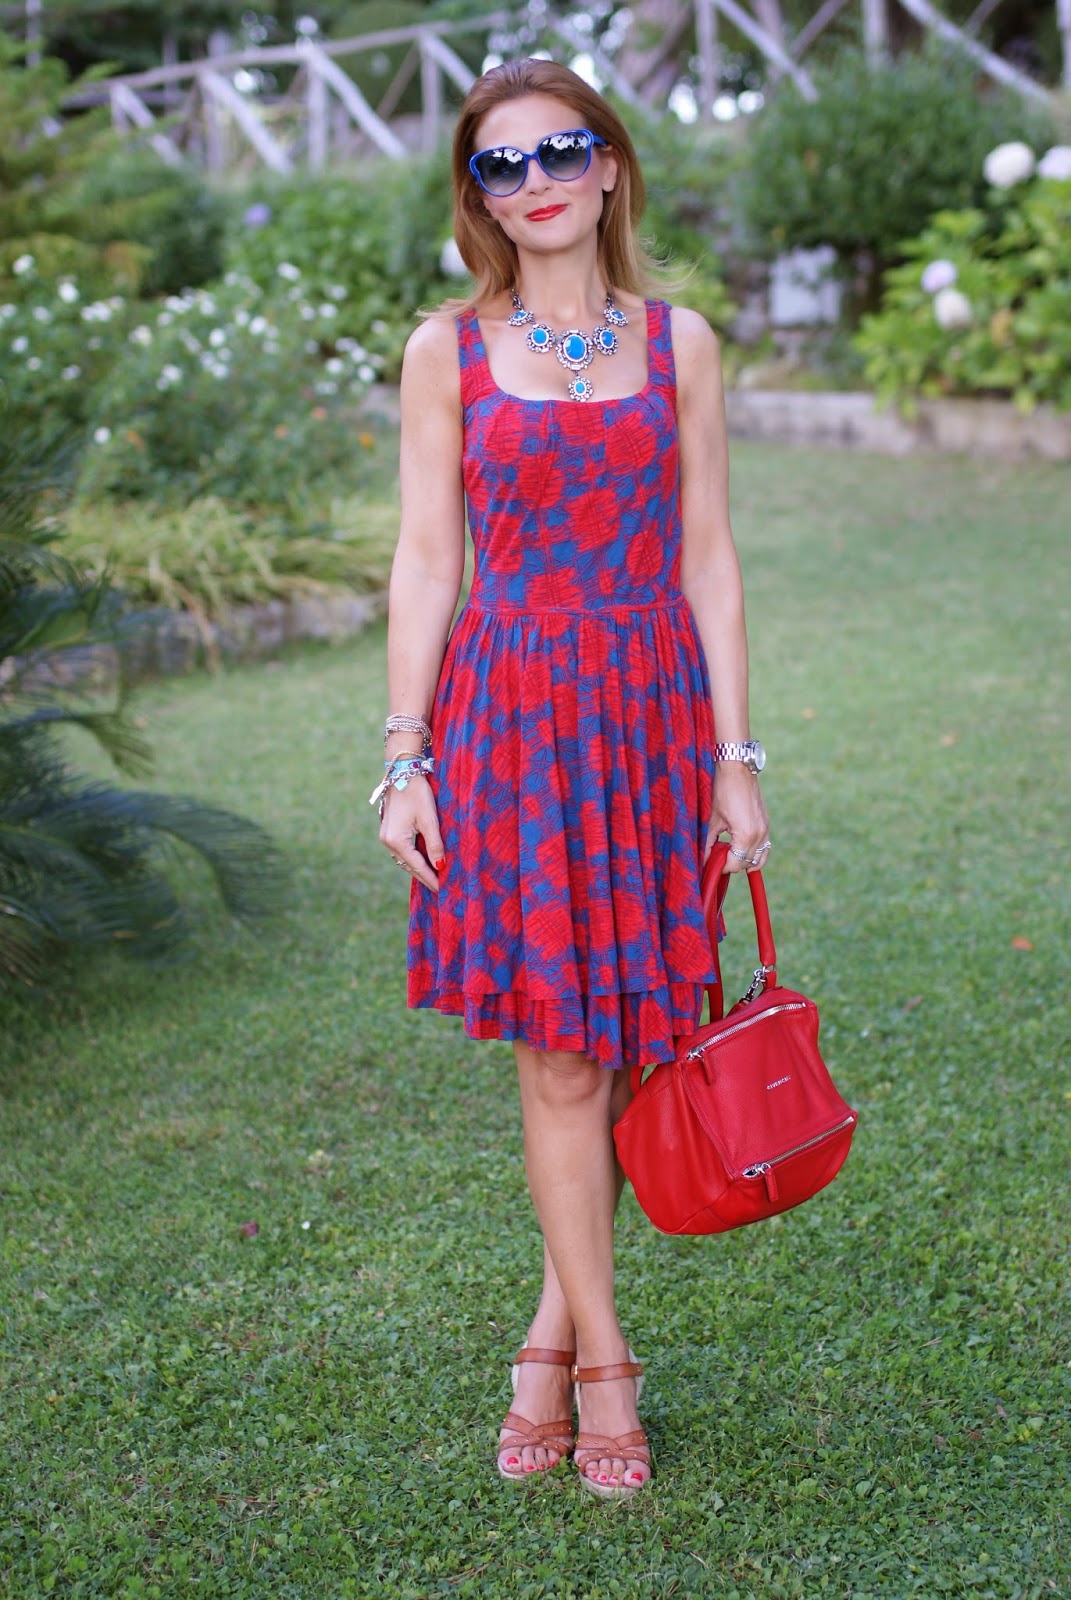 Marc by Marc Jacobs dress, Givenchy Pandora red, Fashion and Cookies, fashion blogger, Villa Cimbrone pics